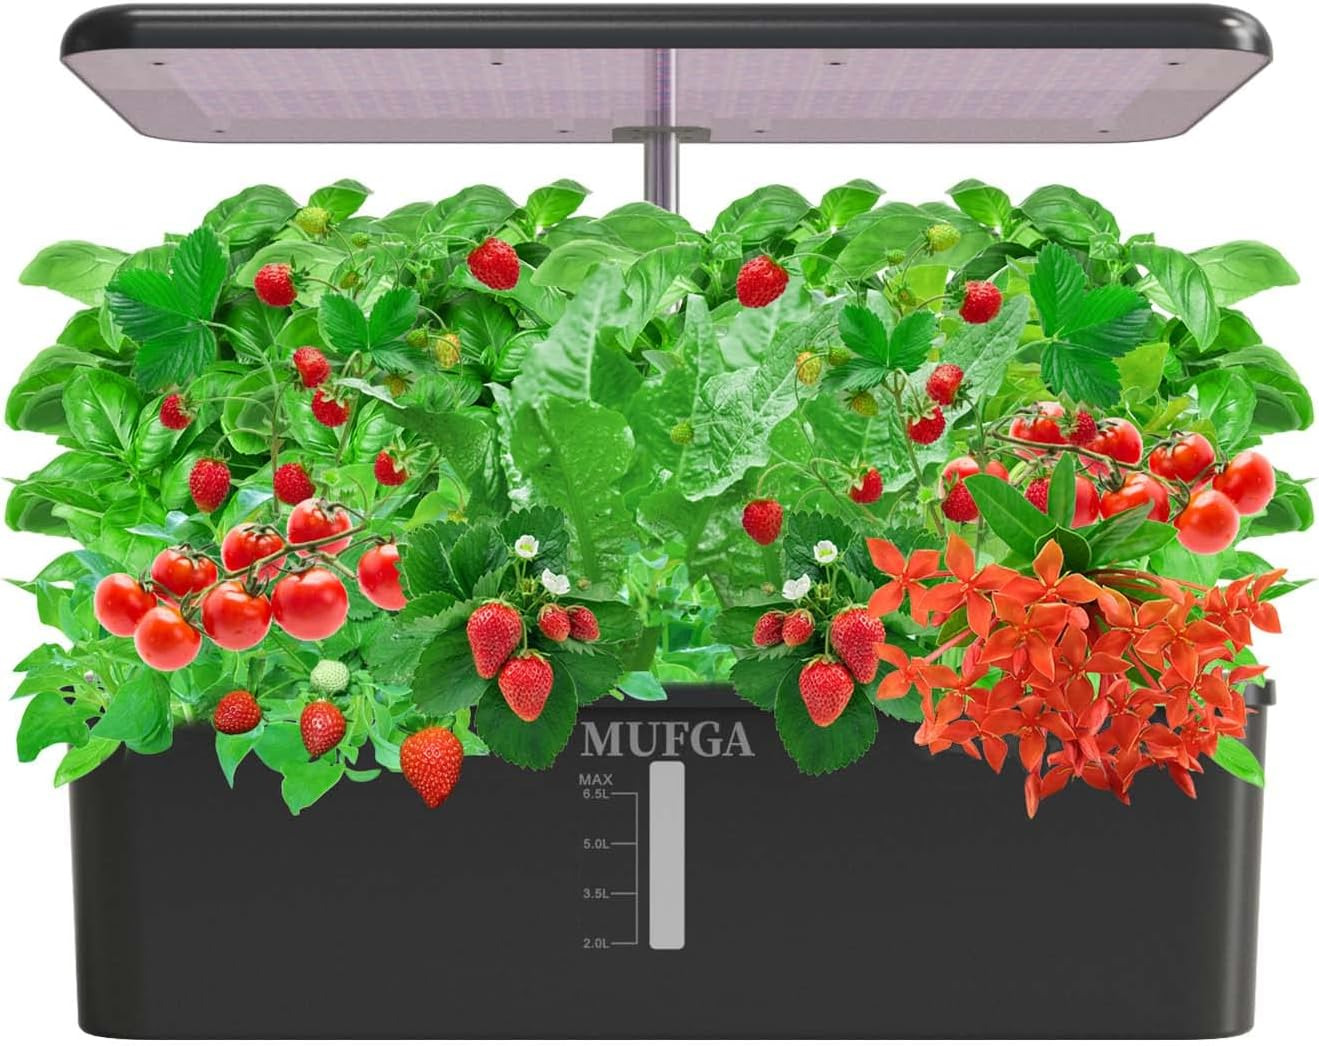 Hydroponics Growing System Herb Garden -  18 Pods Indoor Gardening System with L